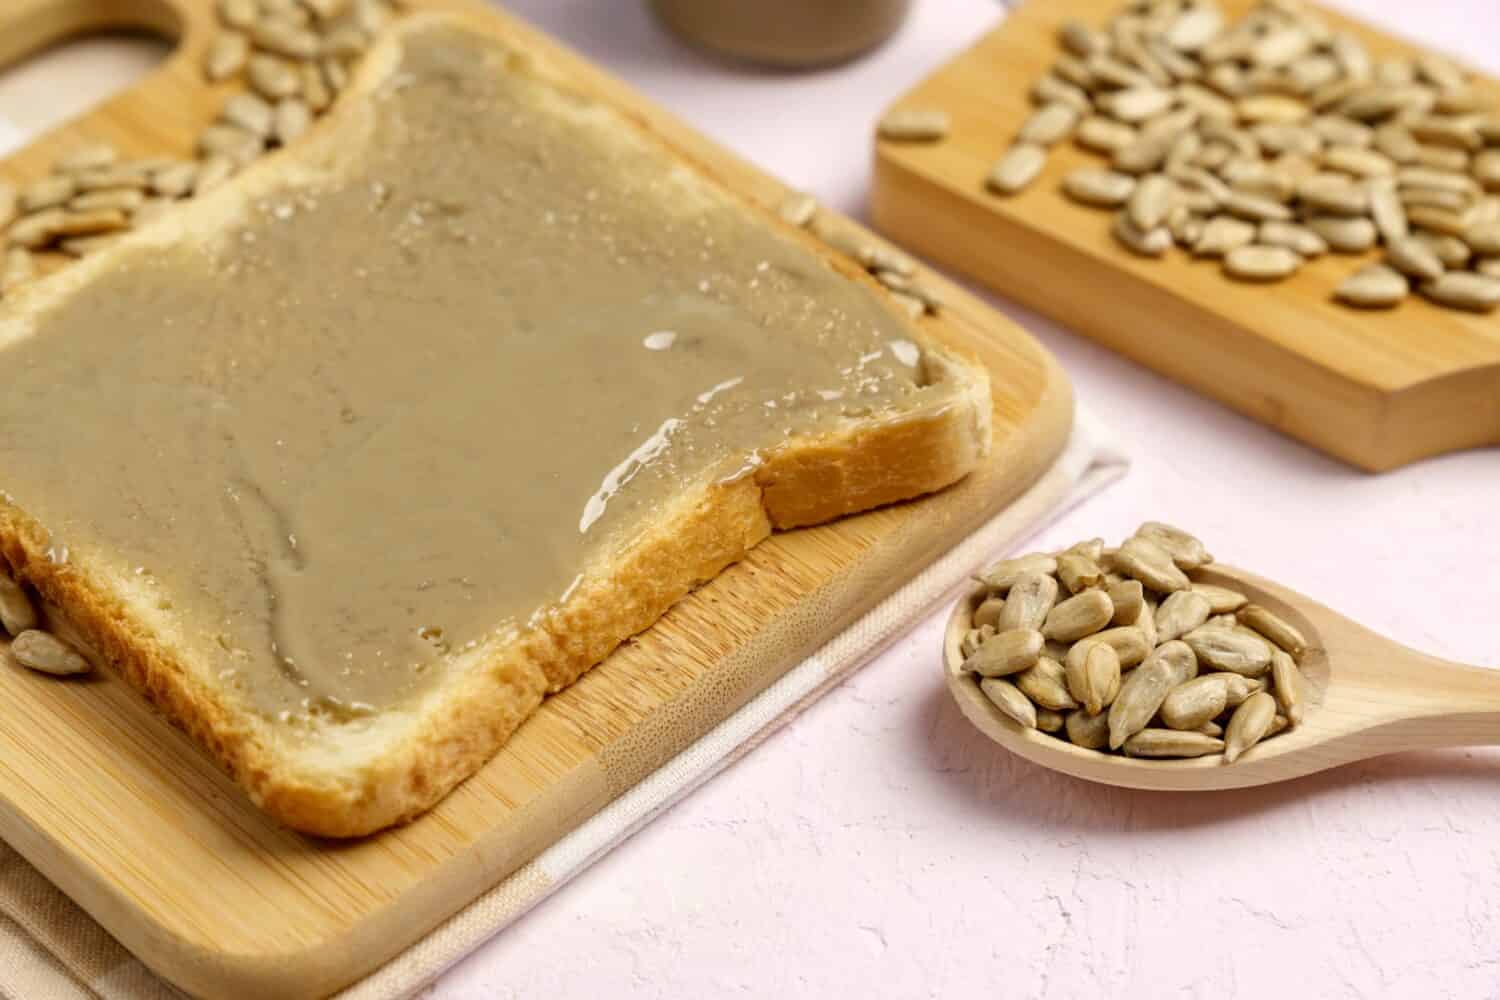 Toast bread with sunflower seeds. Sunflower butter is a new trend and a great alternative to nut butter